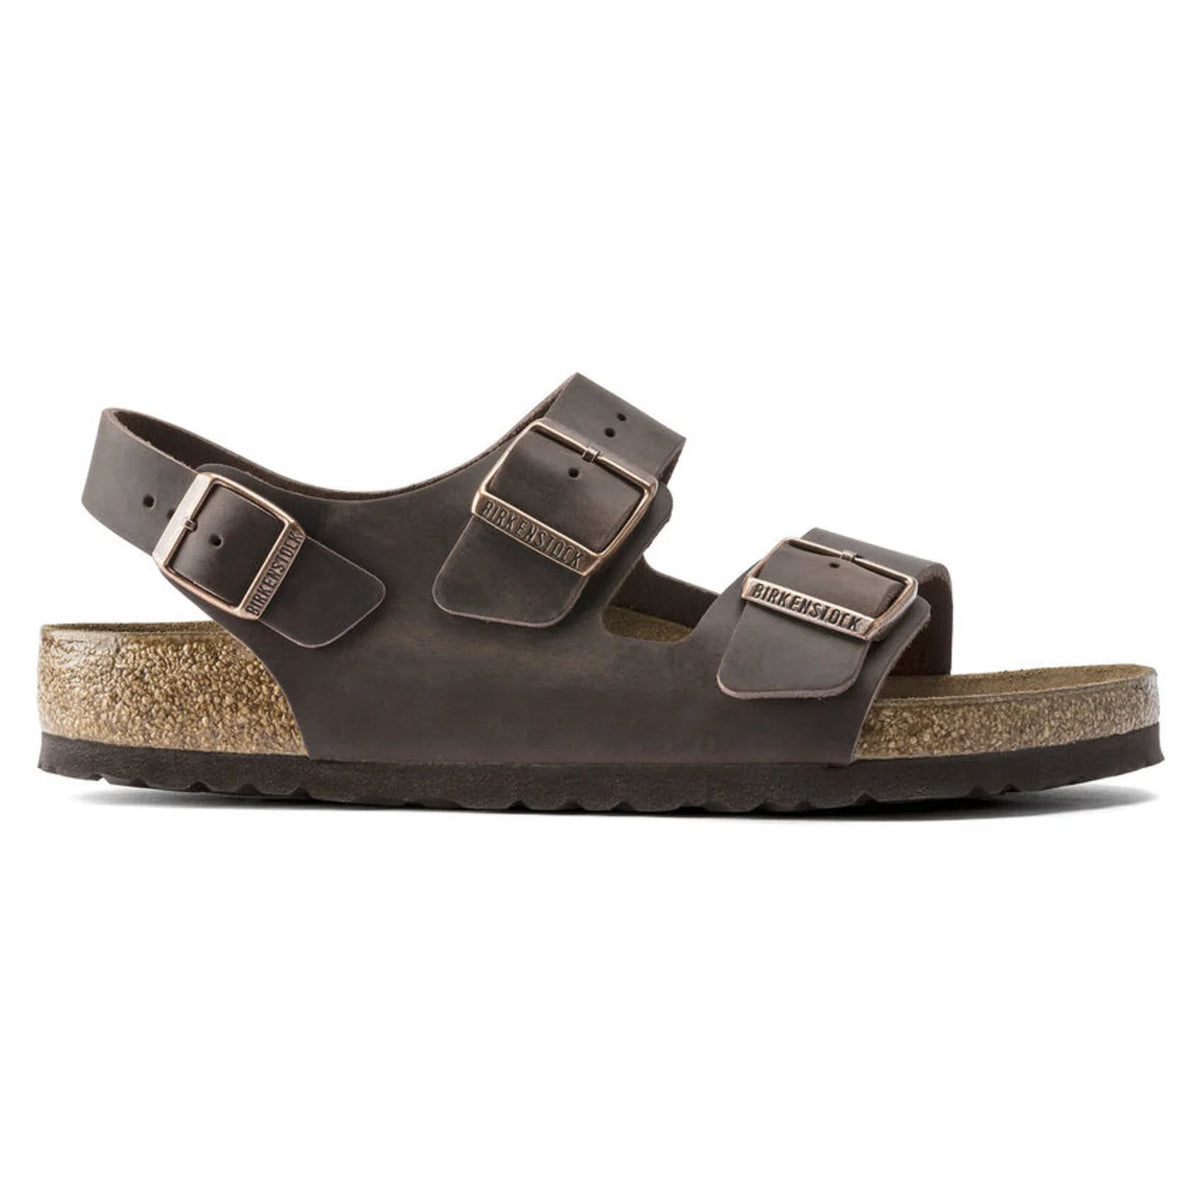 Brown leather Birkenstock Milano Oiled Leather Habana two-strap sandal with contoured cork footbed and buckle closures, isolated on white background.